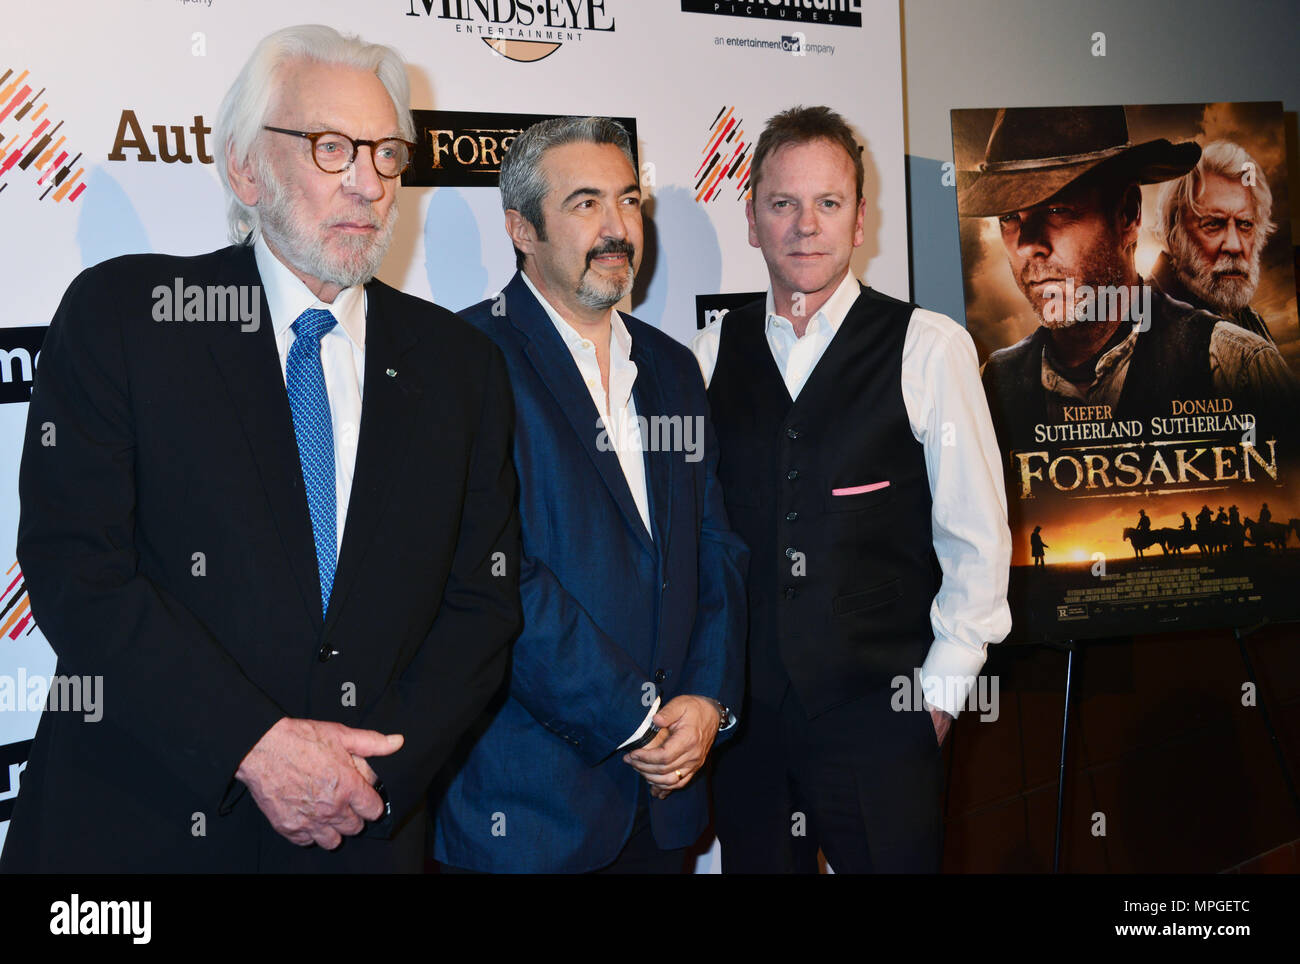 Donald Sutherland, Kiefer Sutherland and John Cassar - director 135 at Forsaken Premiere at the Autry Museum in Los Angeles. February 16, 2016.Donald Sutherland, Kiefer Sutherland and John Cassar - director 135  Event in Hollywood Life - California, Red Carpet Event, USA, Film Industry, Celebrities, Photography, Bestof, Arts Culture and Entertainment, Topix Celebrities fashion, Best of, Hollywood Life, Event in Hollywood Life - California, Red Carpet and backstage, movie celebrities, TV celebrities, Music celebrities, Arts Culture and Entertainment, vertical, one person, Photography,    inquir Stock Photo